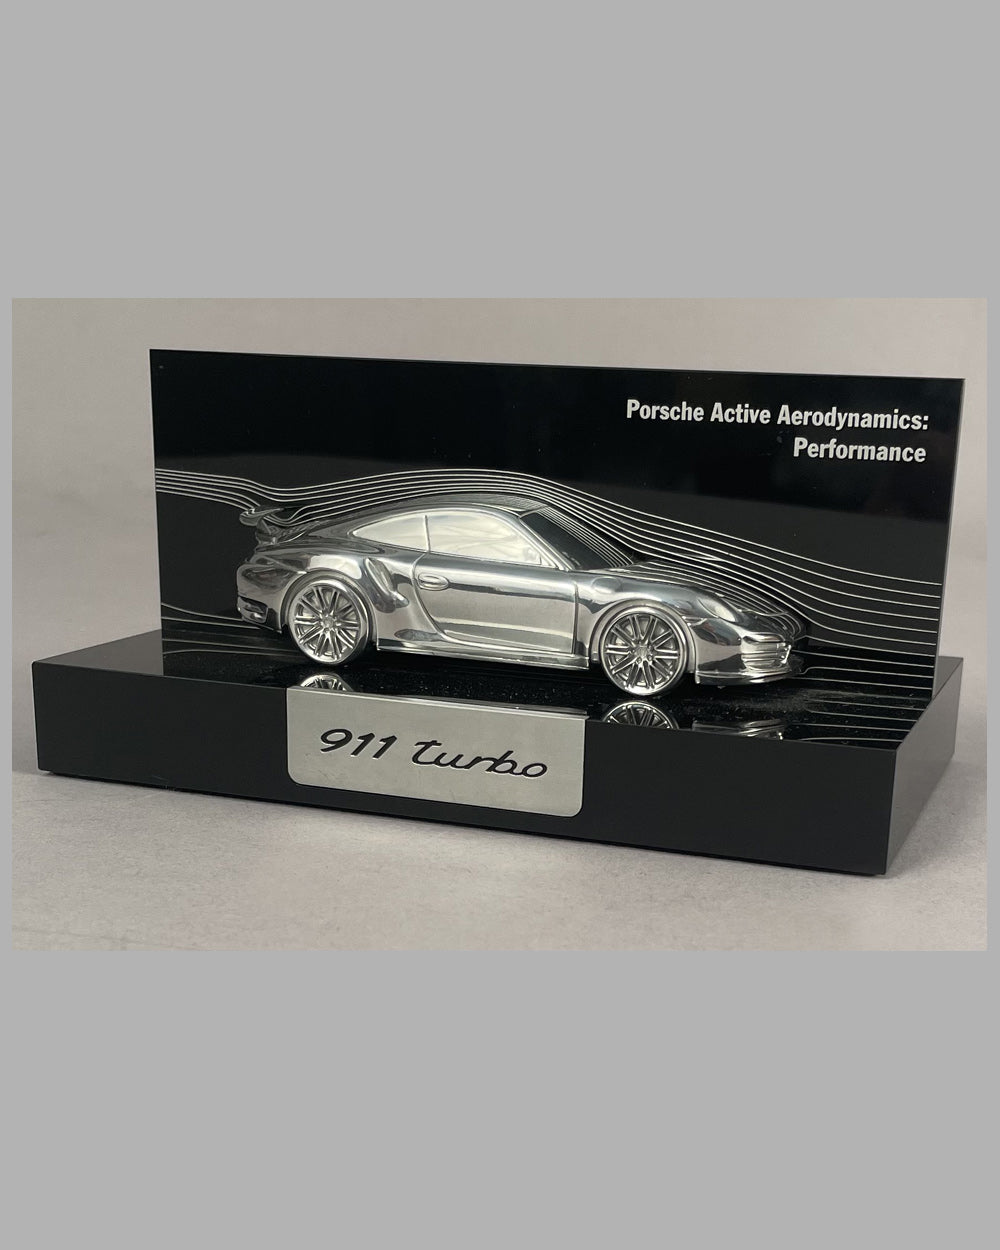 Porsche 911 Turbo aluminum factory model, very limited edition